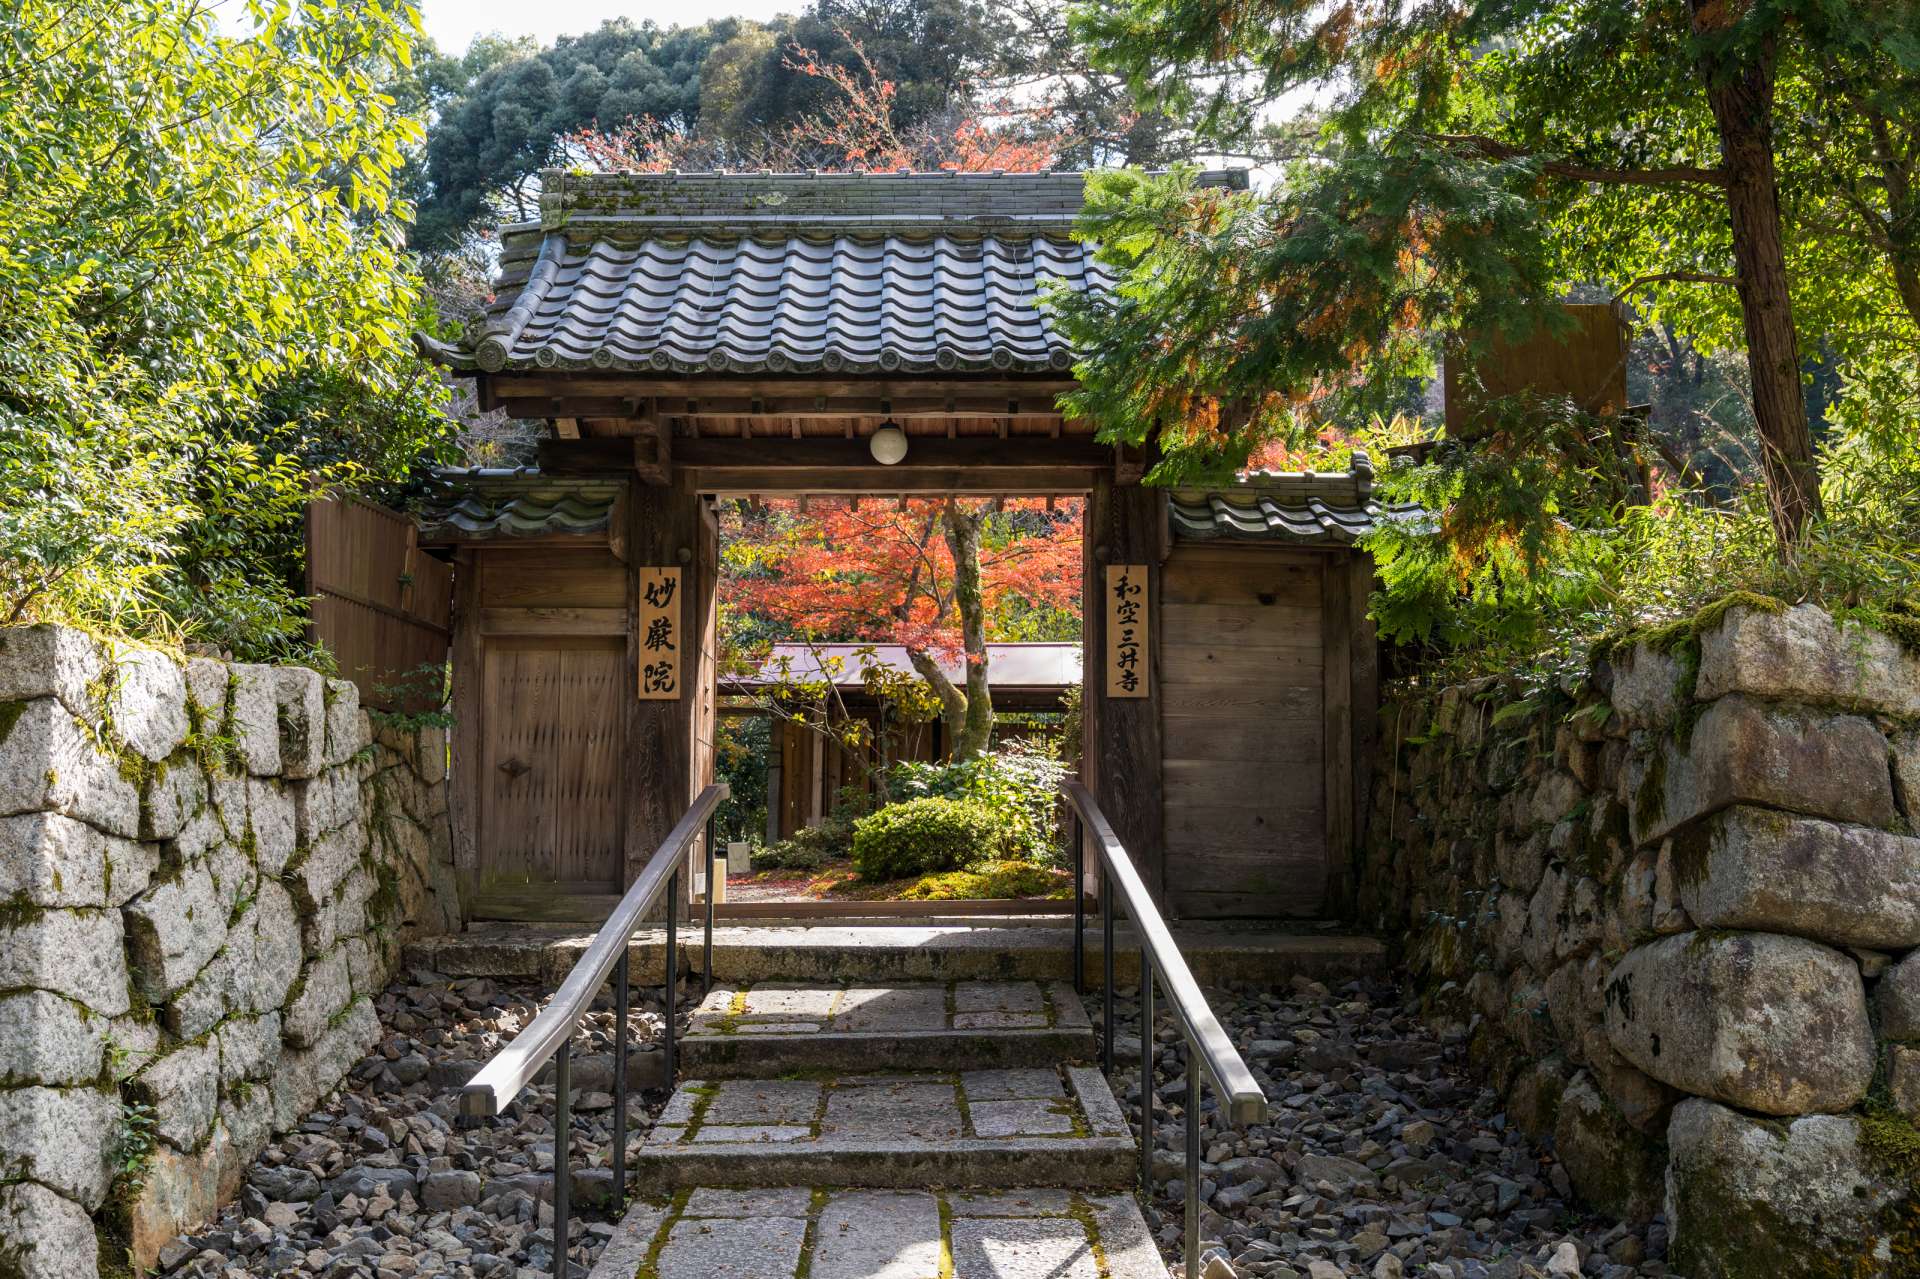 The 400-year-old building, which used to be the Buddhist priests’ quarters, has been transformed into a beautiful lodge exclusively available to one group per day.